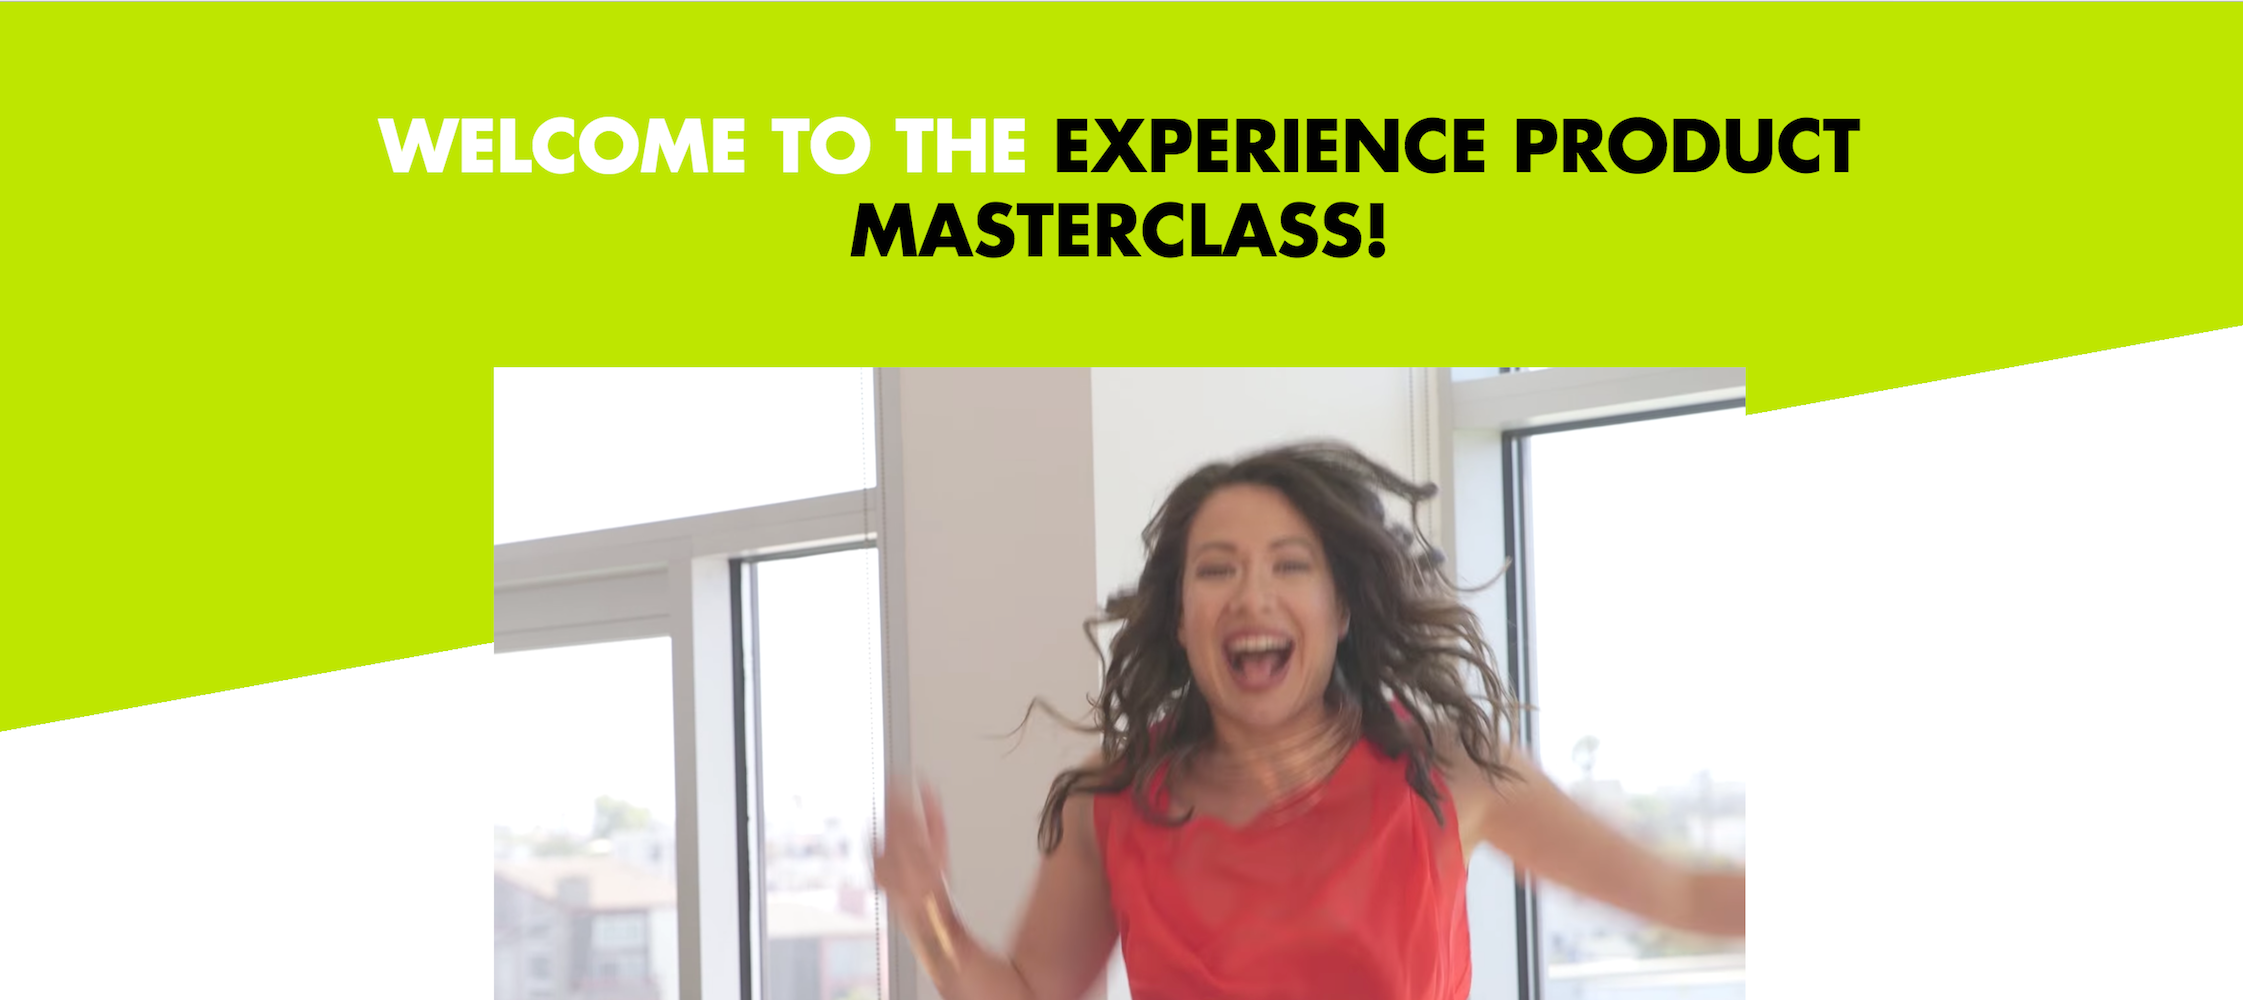 Experience Product Masterclass by Marisa Murgatroyd Welcome Page